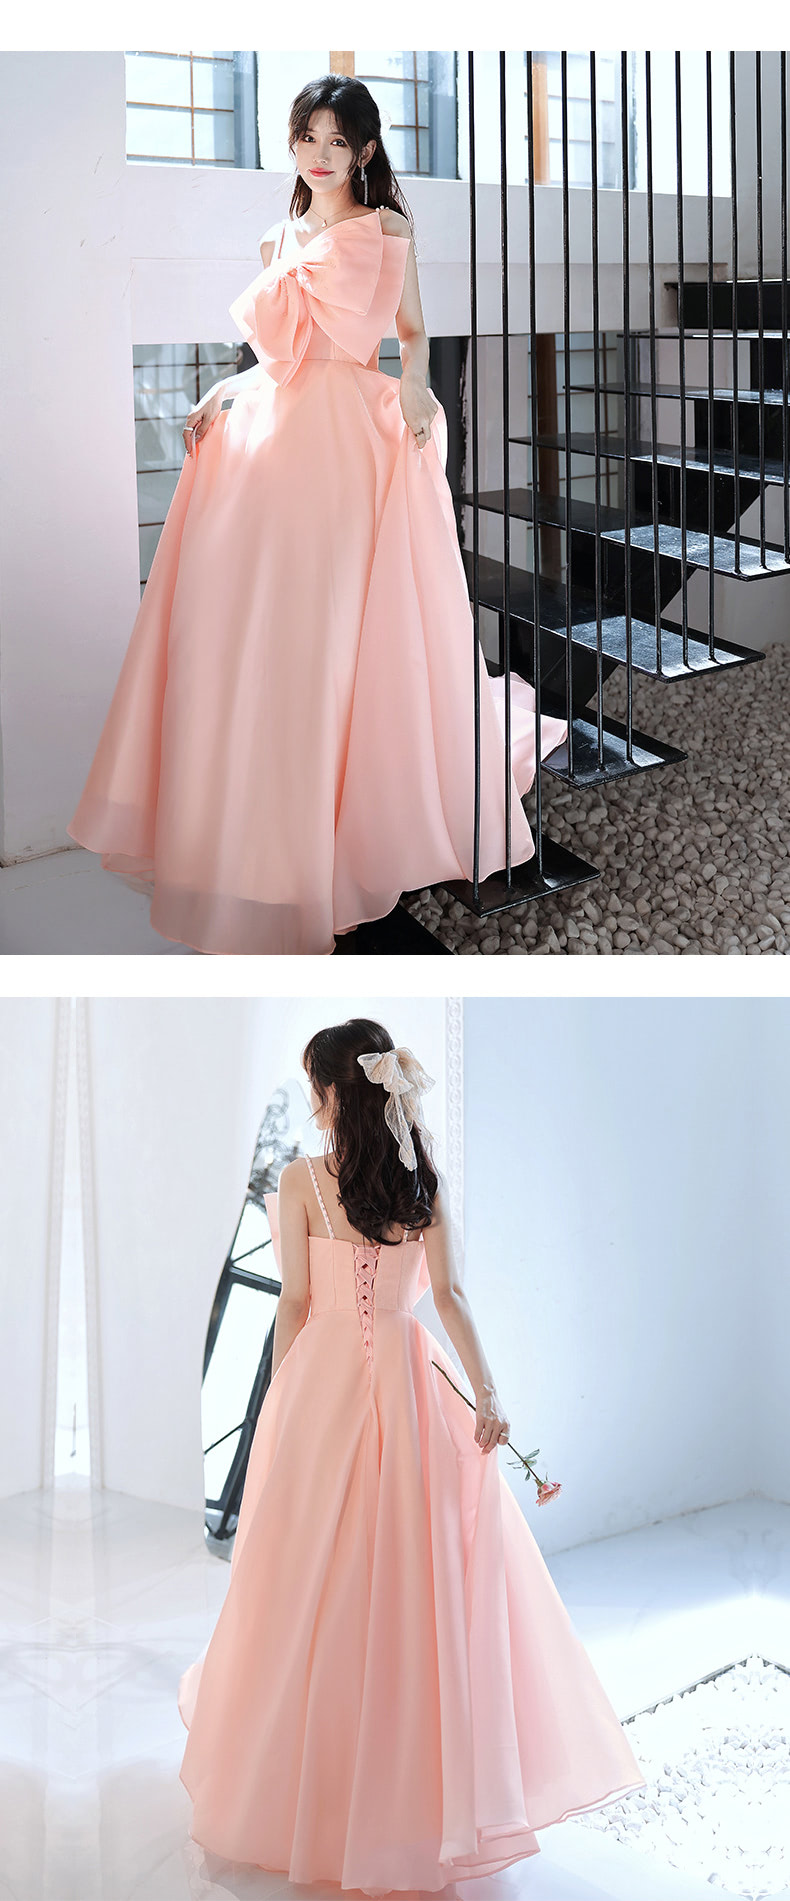 Pretty-Pink-Prom-Party-Long-Slip-Dress-Cute-Bow-Tie-Ball-Gown13